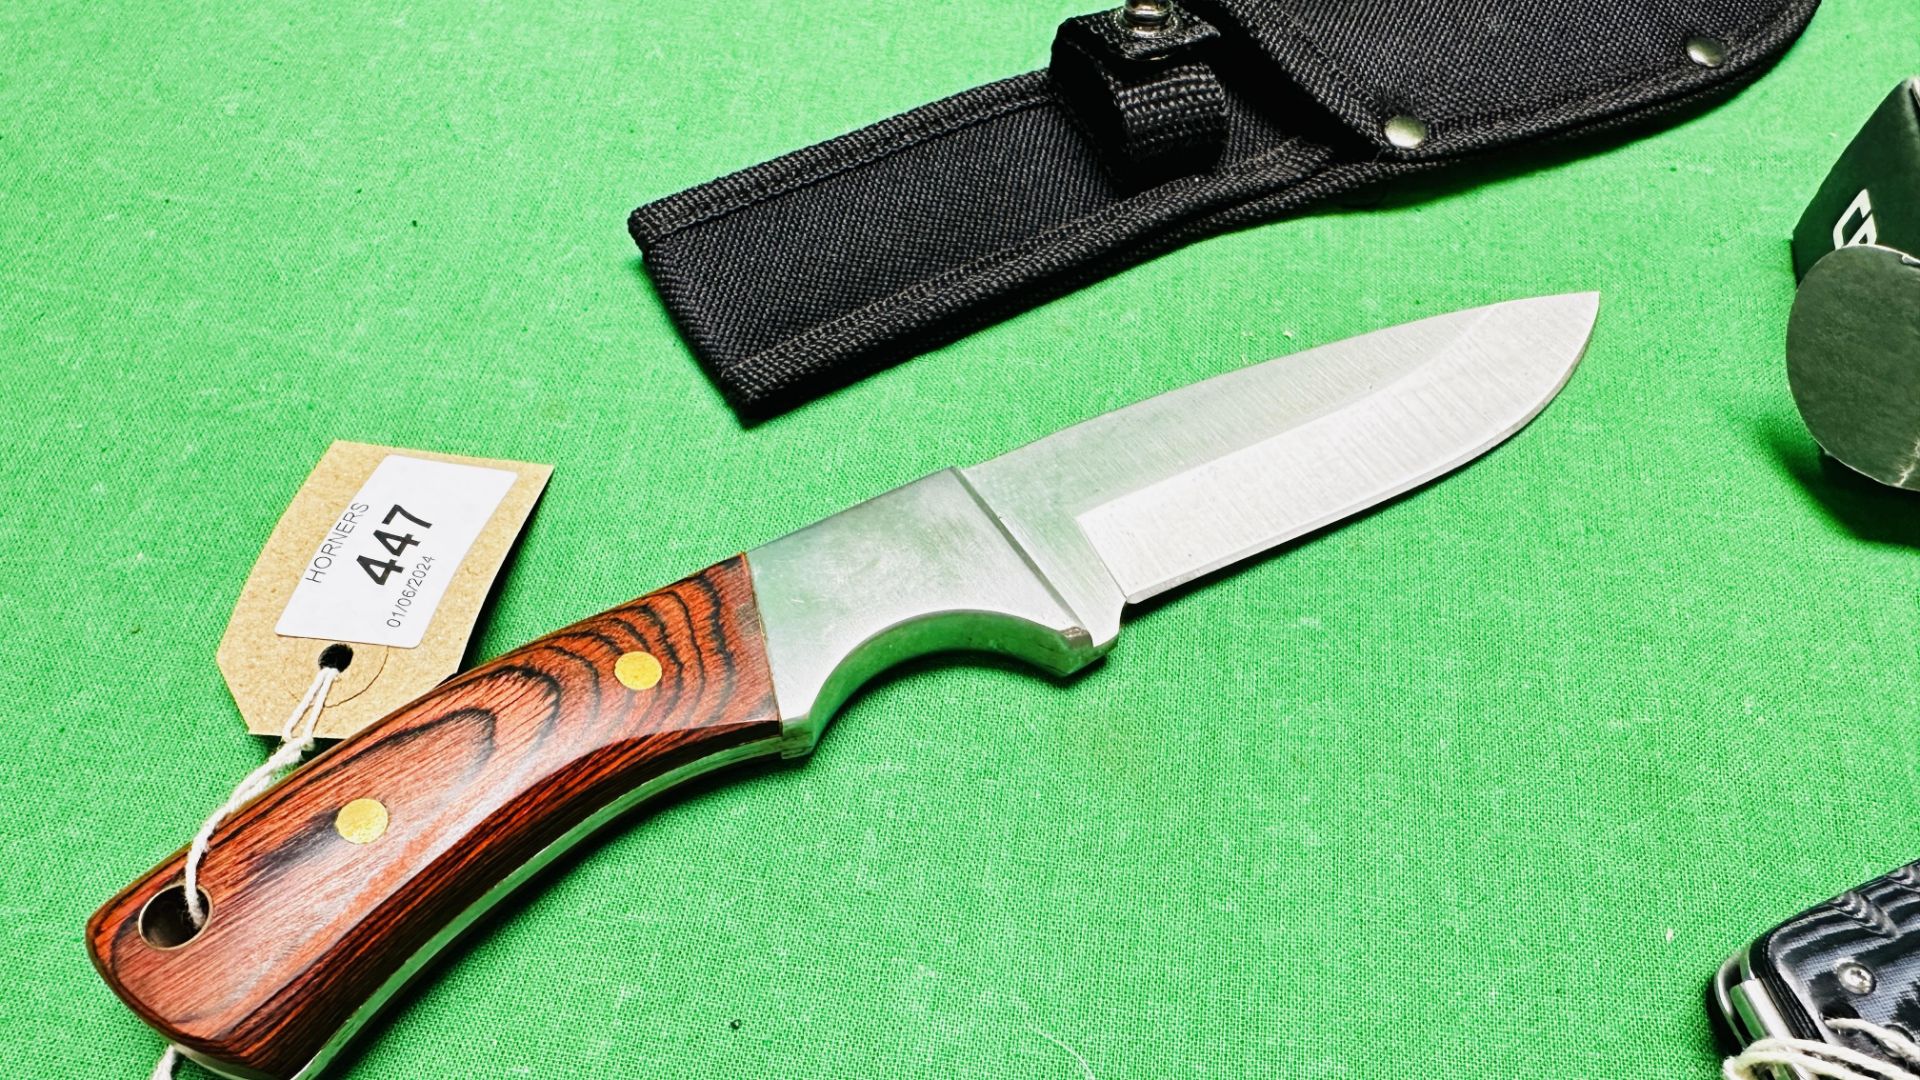 A HUNTING KNIFE IN CANVAS BELT SHEATH ALONG WITH WITH CRKT FOLDING LOCK KNIFE - NO POSTAGE OR - Image 5 of 9